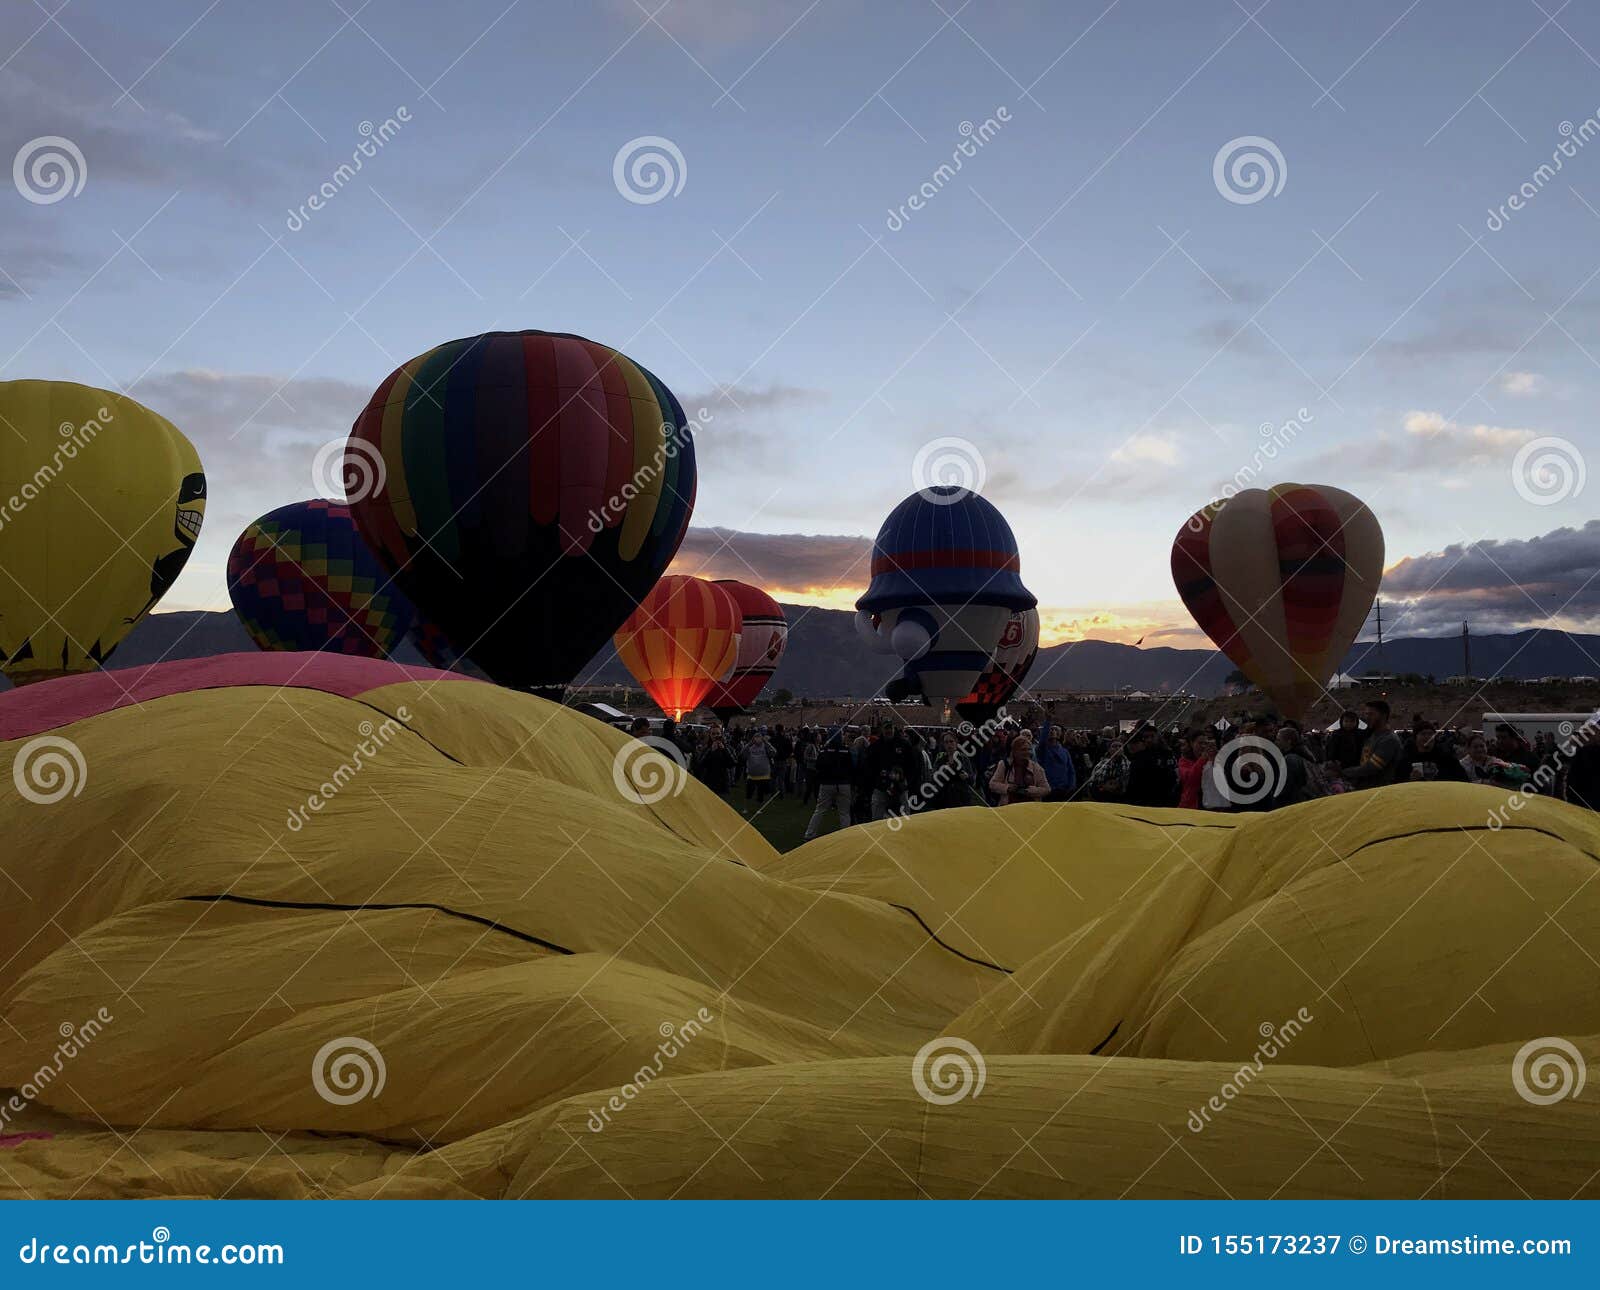 view of stages of inflation at the albuquerque international balloon fiesta with a beautiful sunrise.